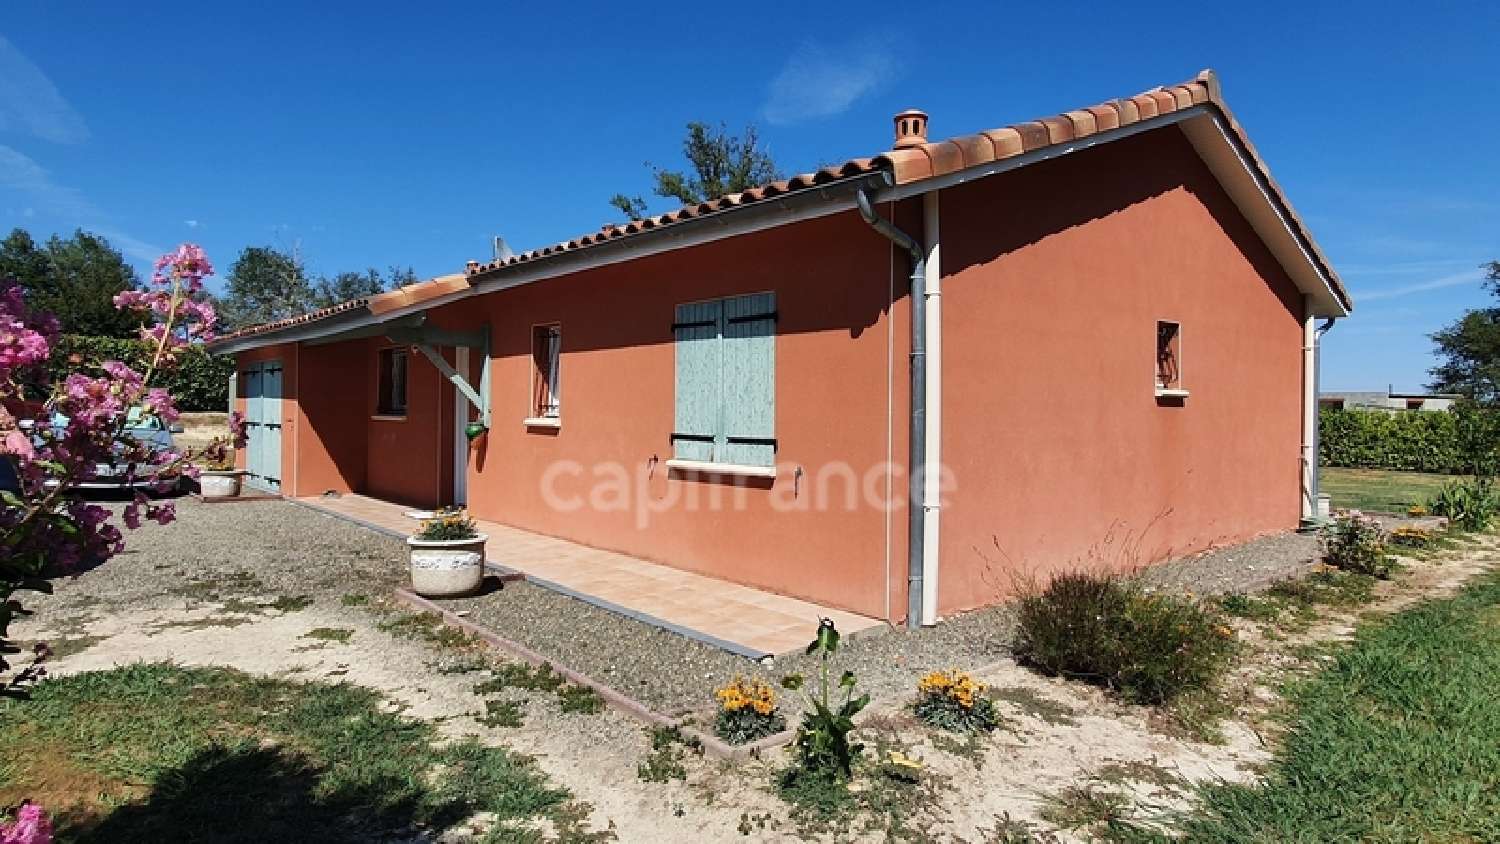  for sale house Monclar Gers 1